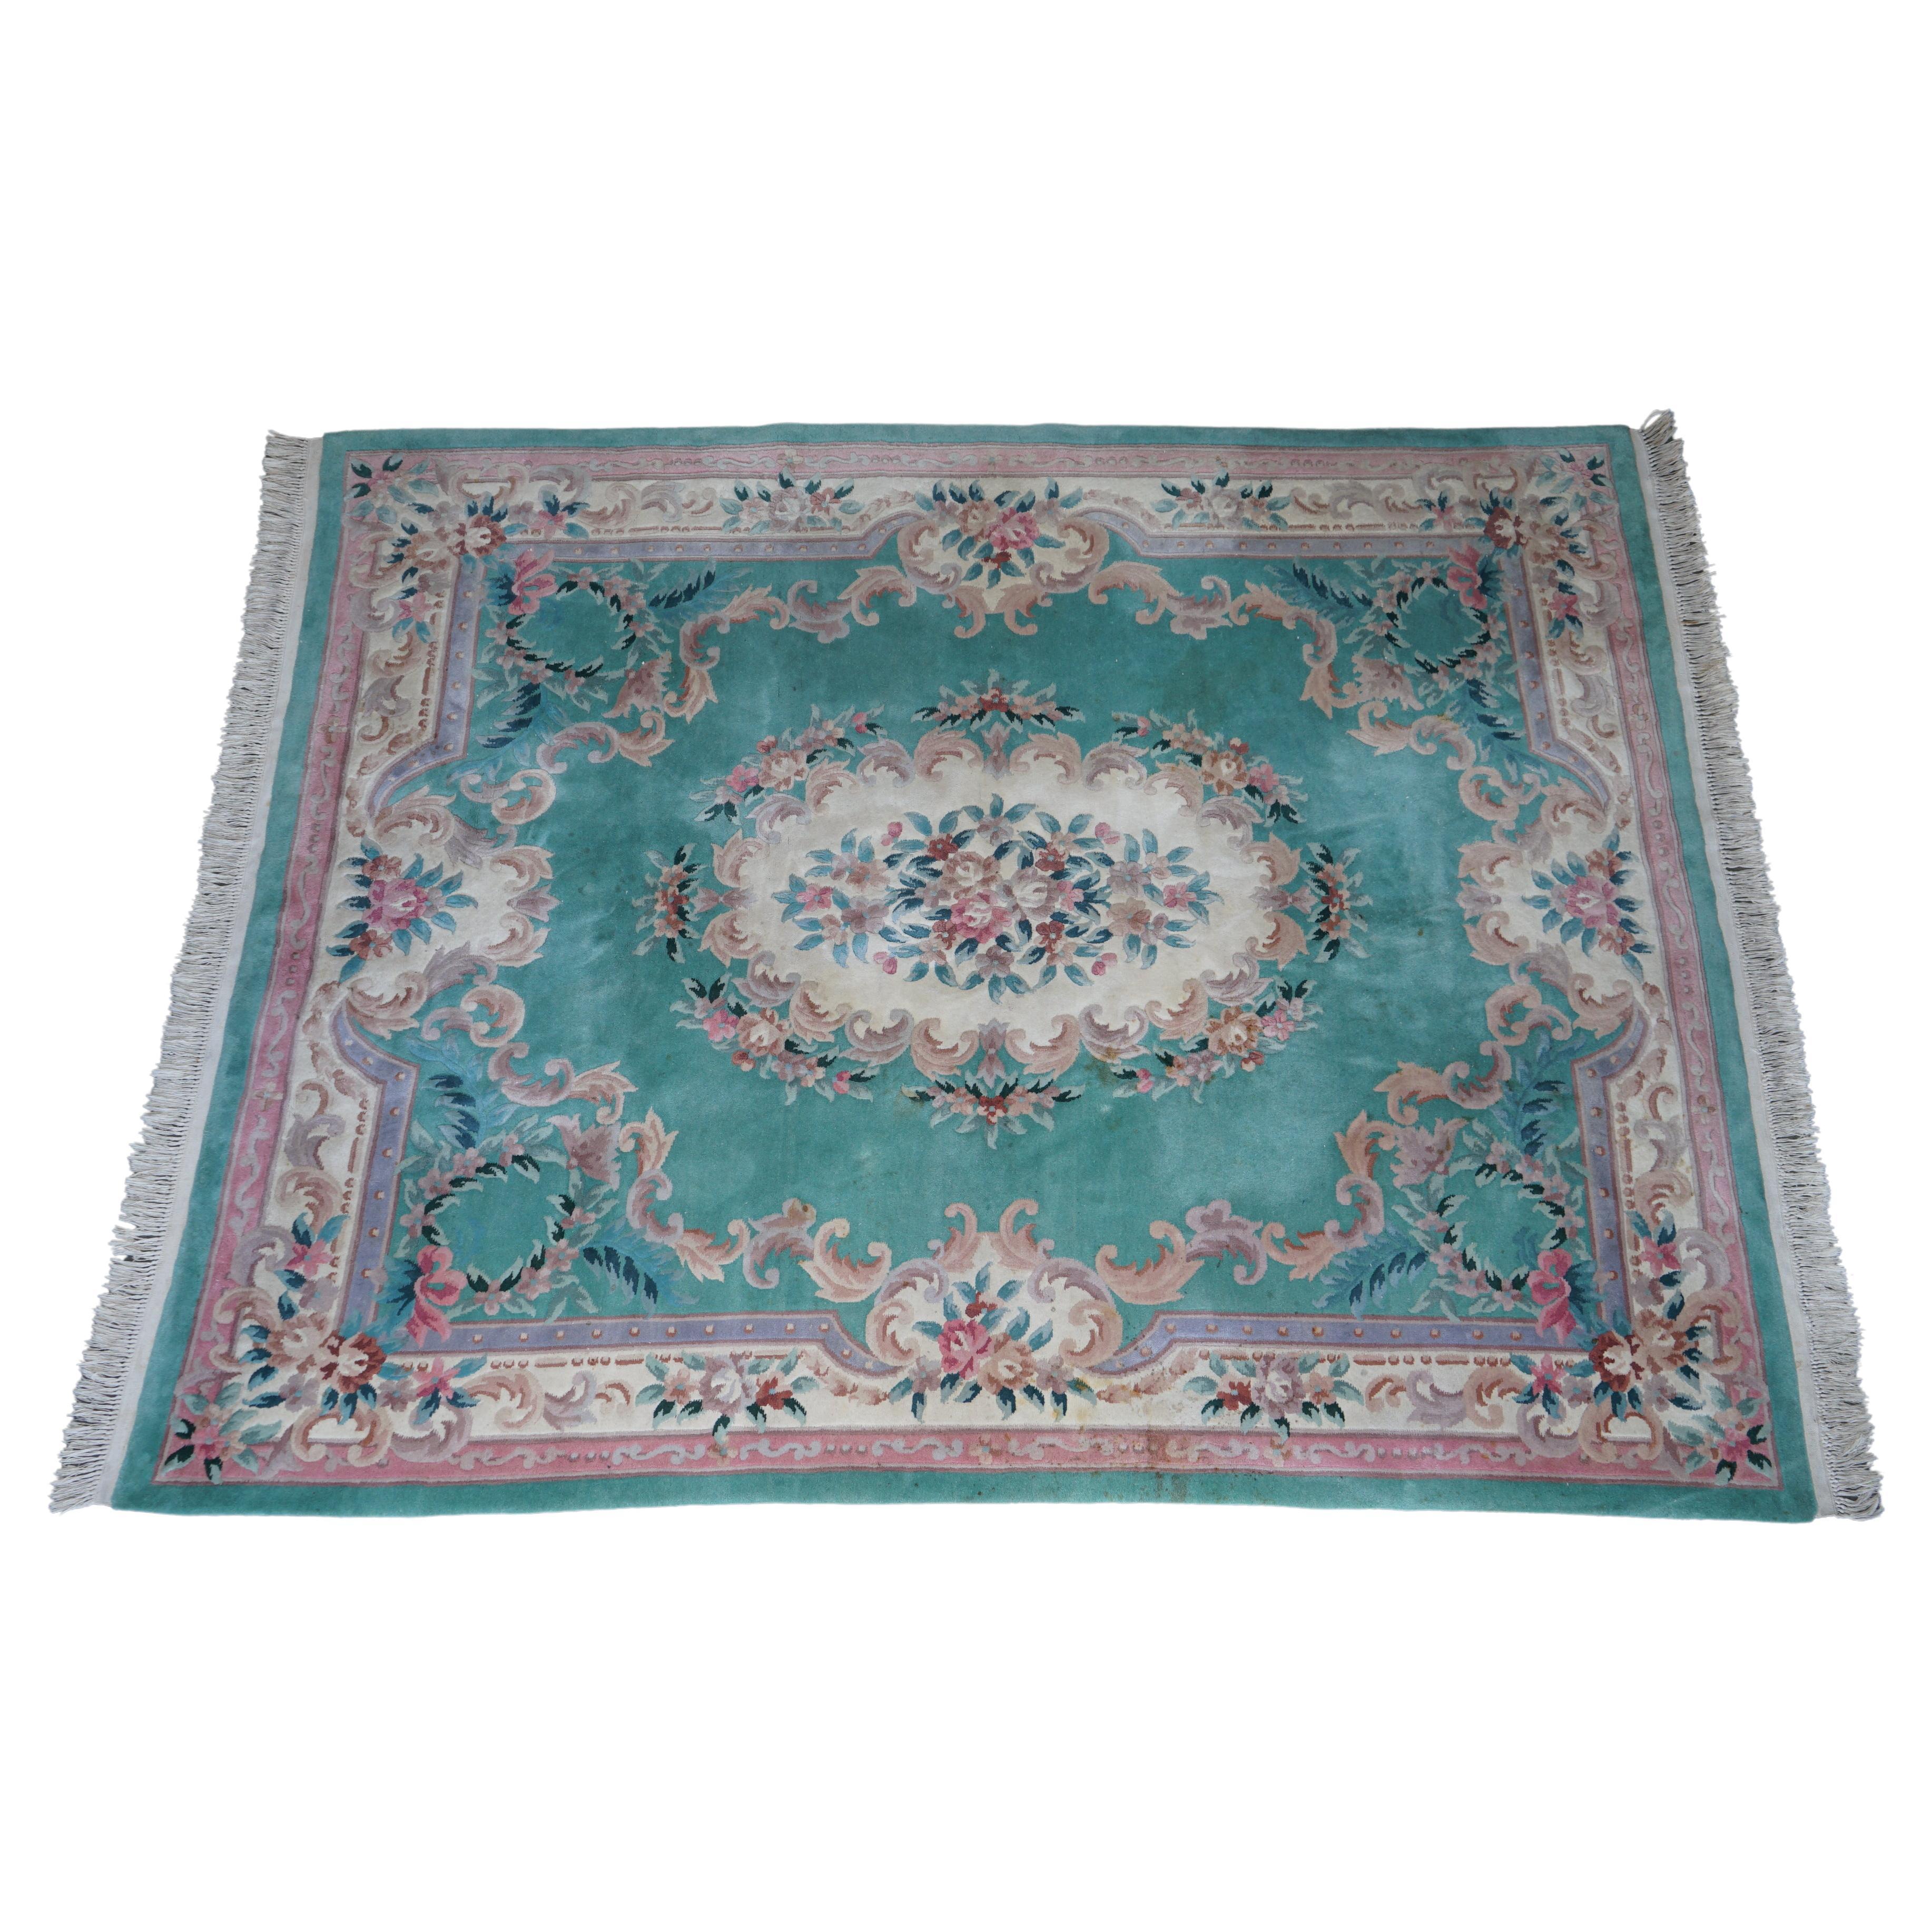 Very Large Chinese Vintage Floral Medallion Border Rug in Aqua and Pink Tones For Sale